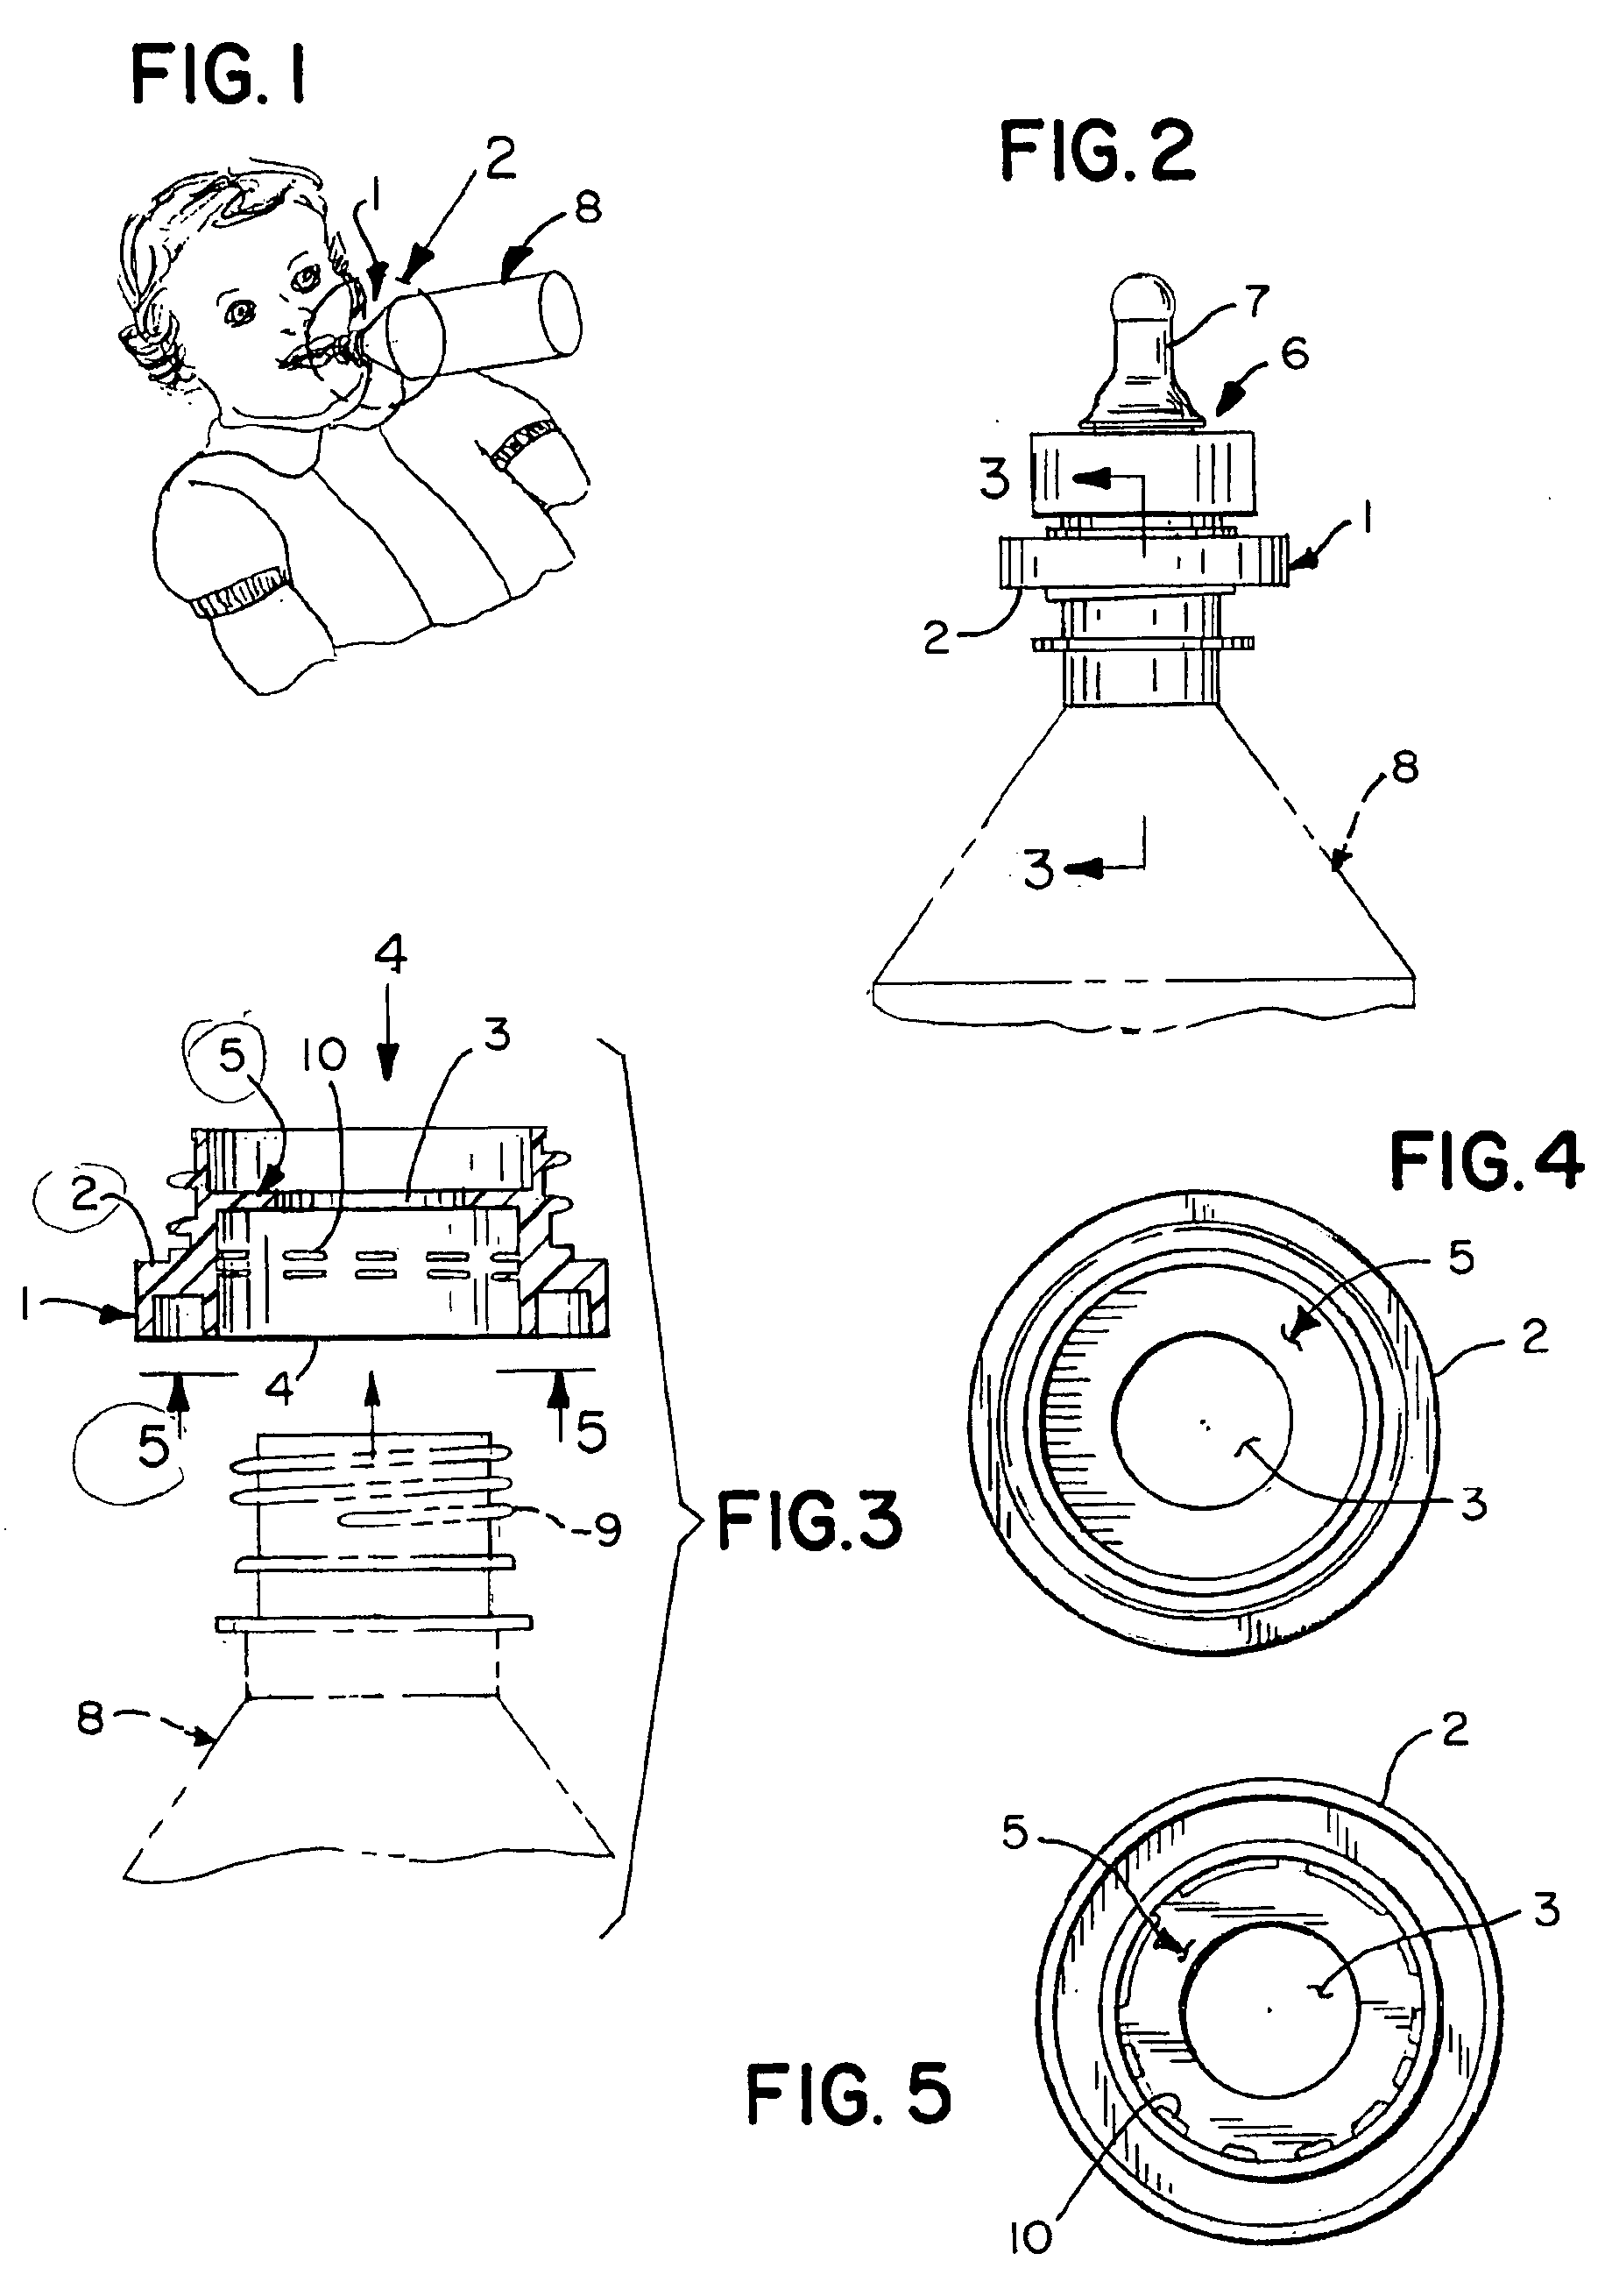 Nipple adapter for a standard narrow-mouthed beverage bottle